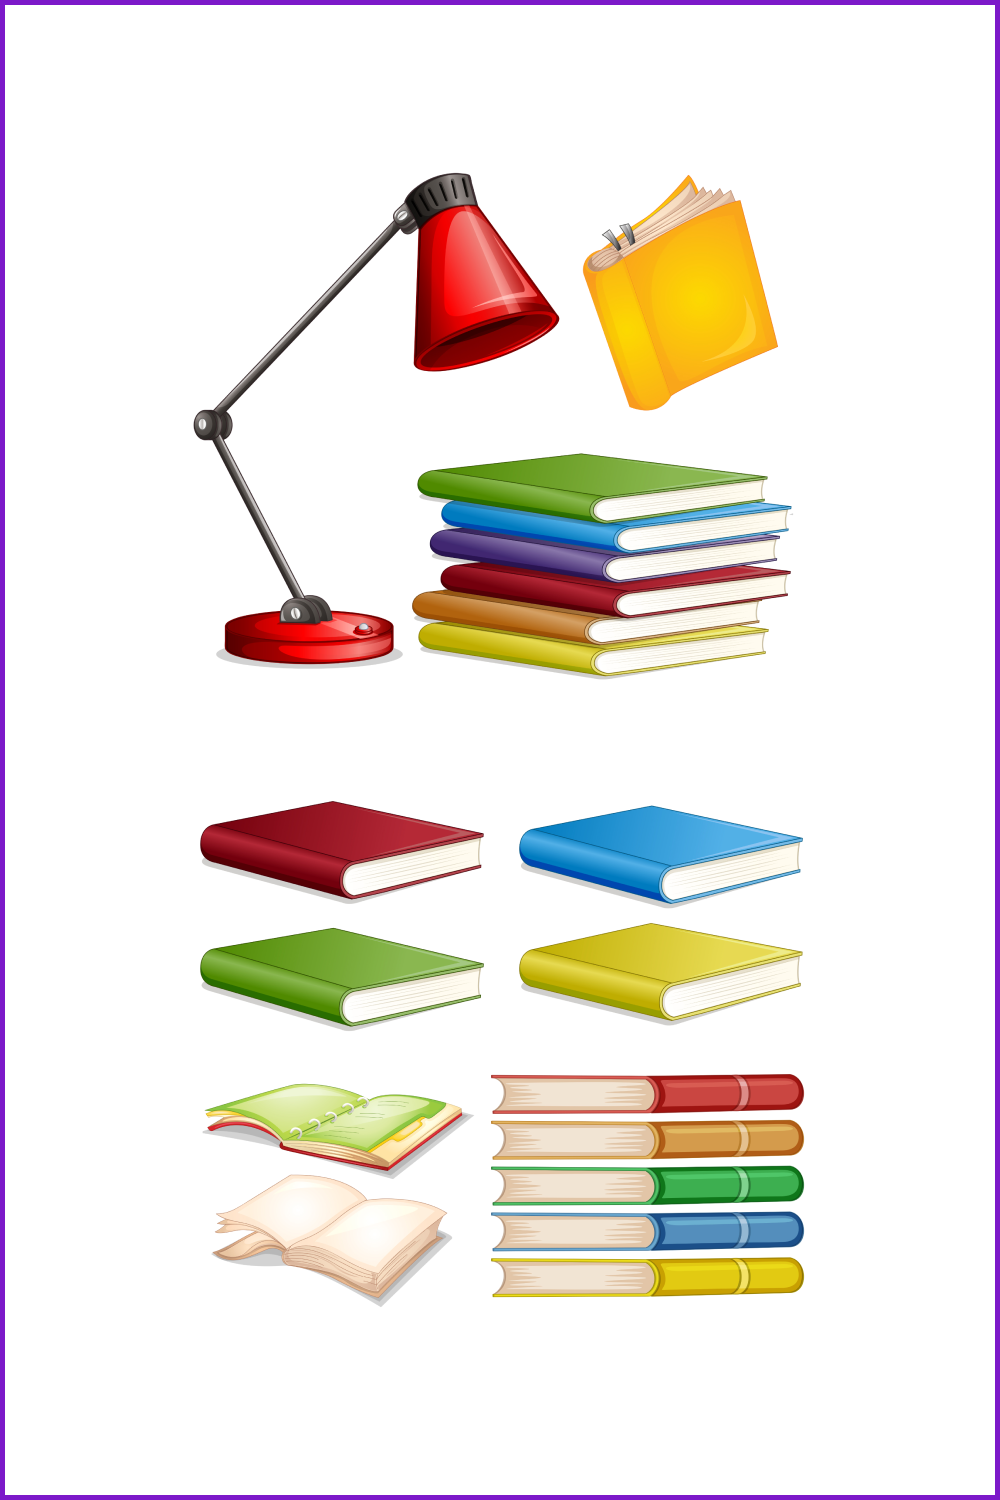 Drawn multi-colored books in stacks and separately and a table lamp.